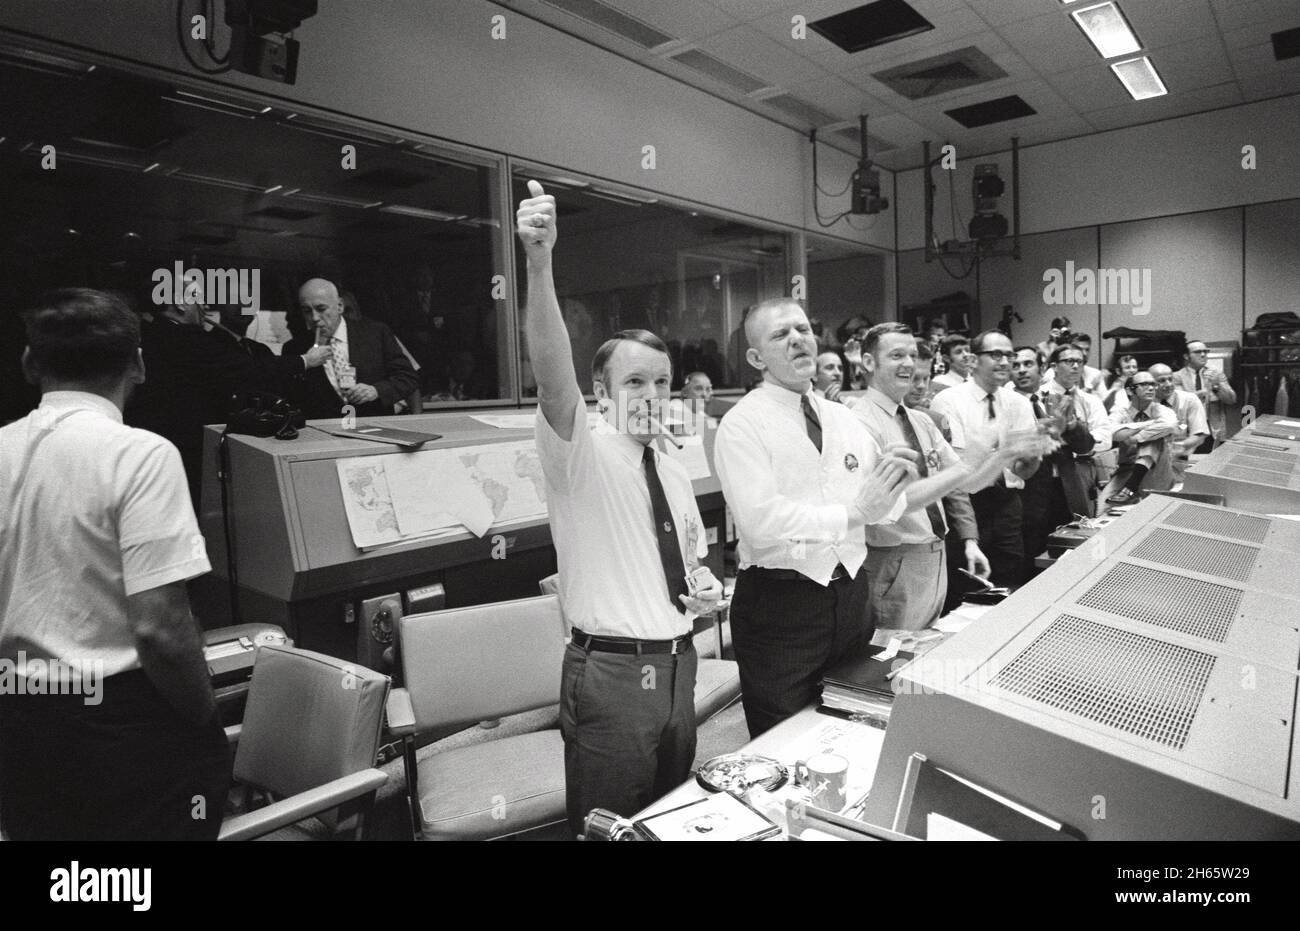 Three of the four Apollo 13 Flight Directors applaud the successful splashdown of the Command Module 'Odyssey' while Dr. Robert R. Gilruth, Director, Manned Spacecraft Center (MSC), and Dr. Christopher C. Kraft Jr., MSC Deputy Director, light up cigars (upper left). The Flight Directors are from left to right: Gerald D. Griffin, Eugene F. Kranz and Glynn S. Lunney. Stock Photo